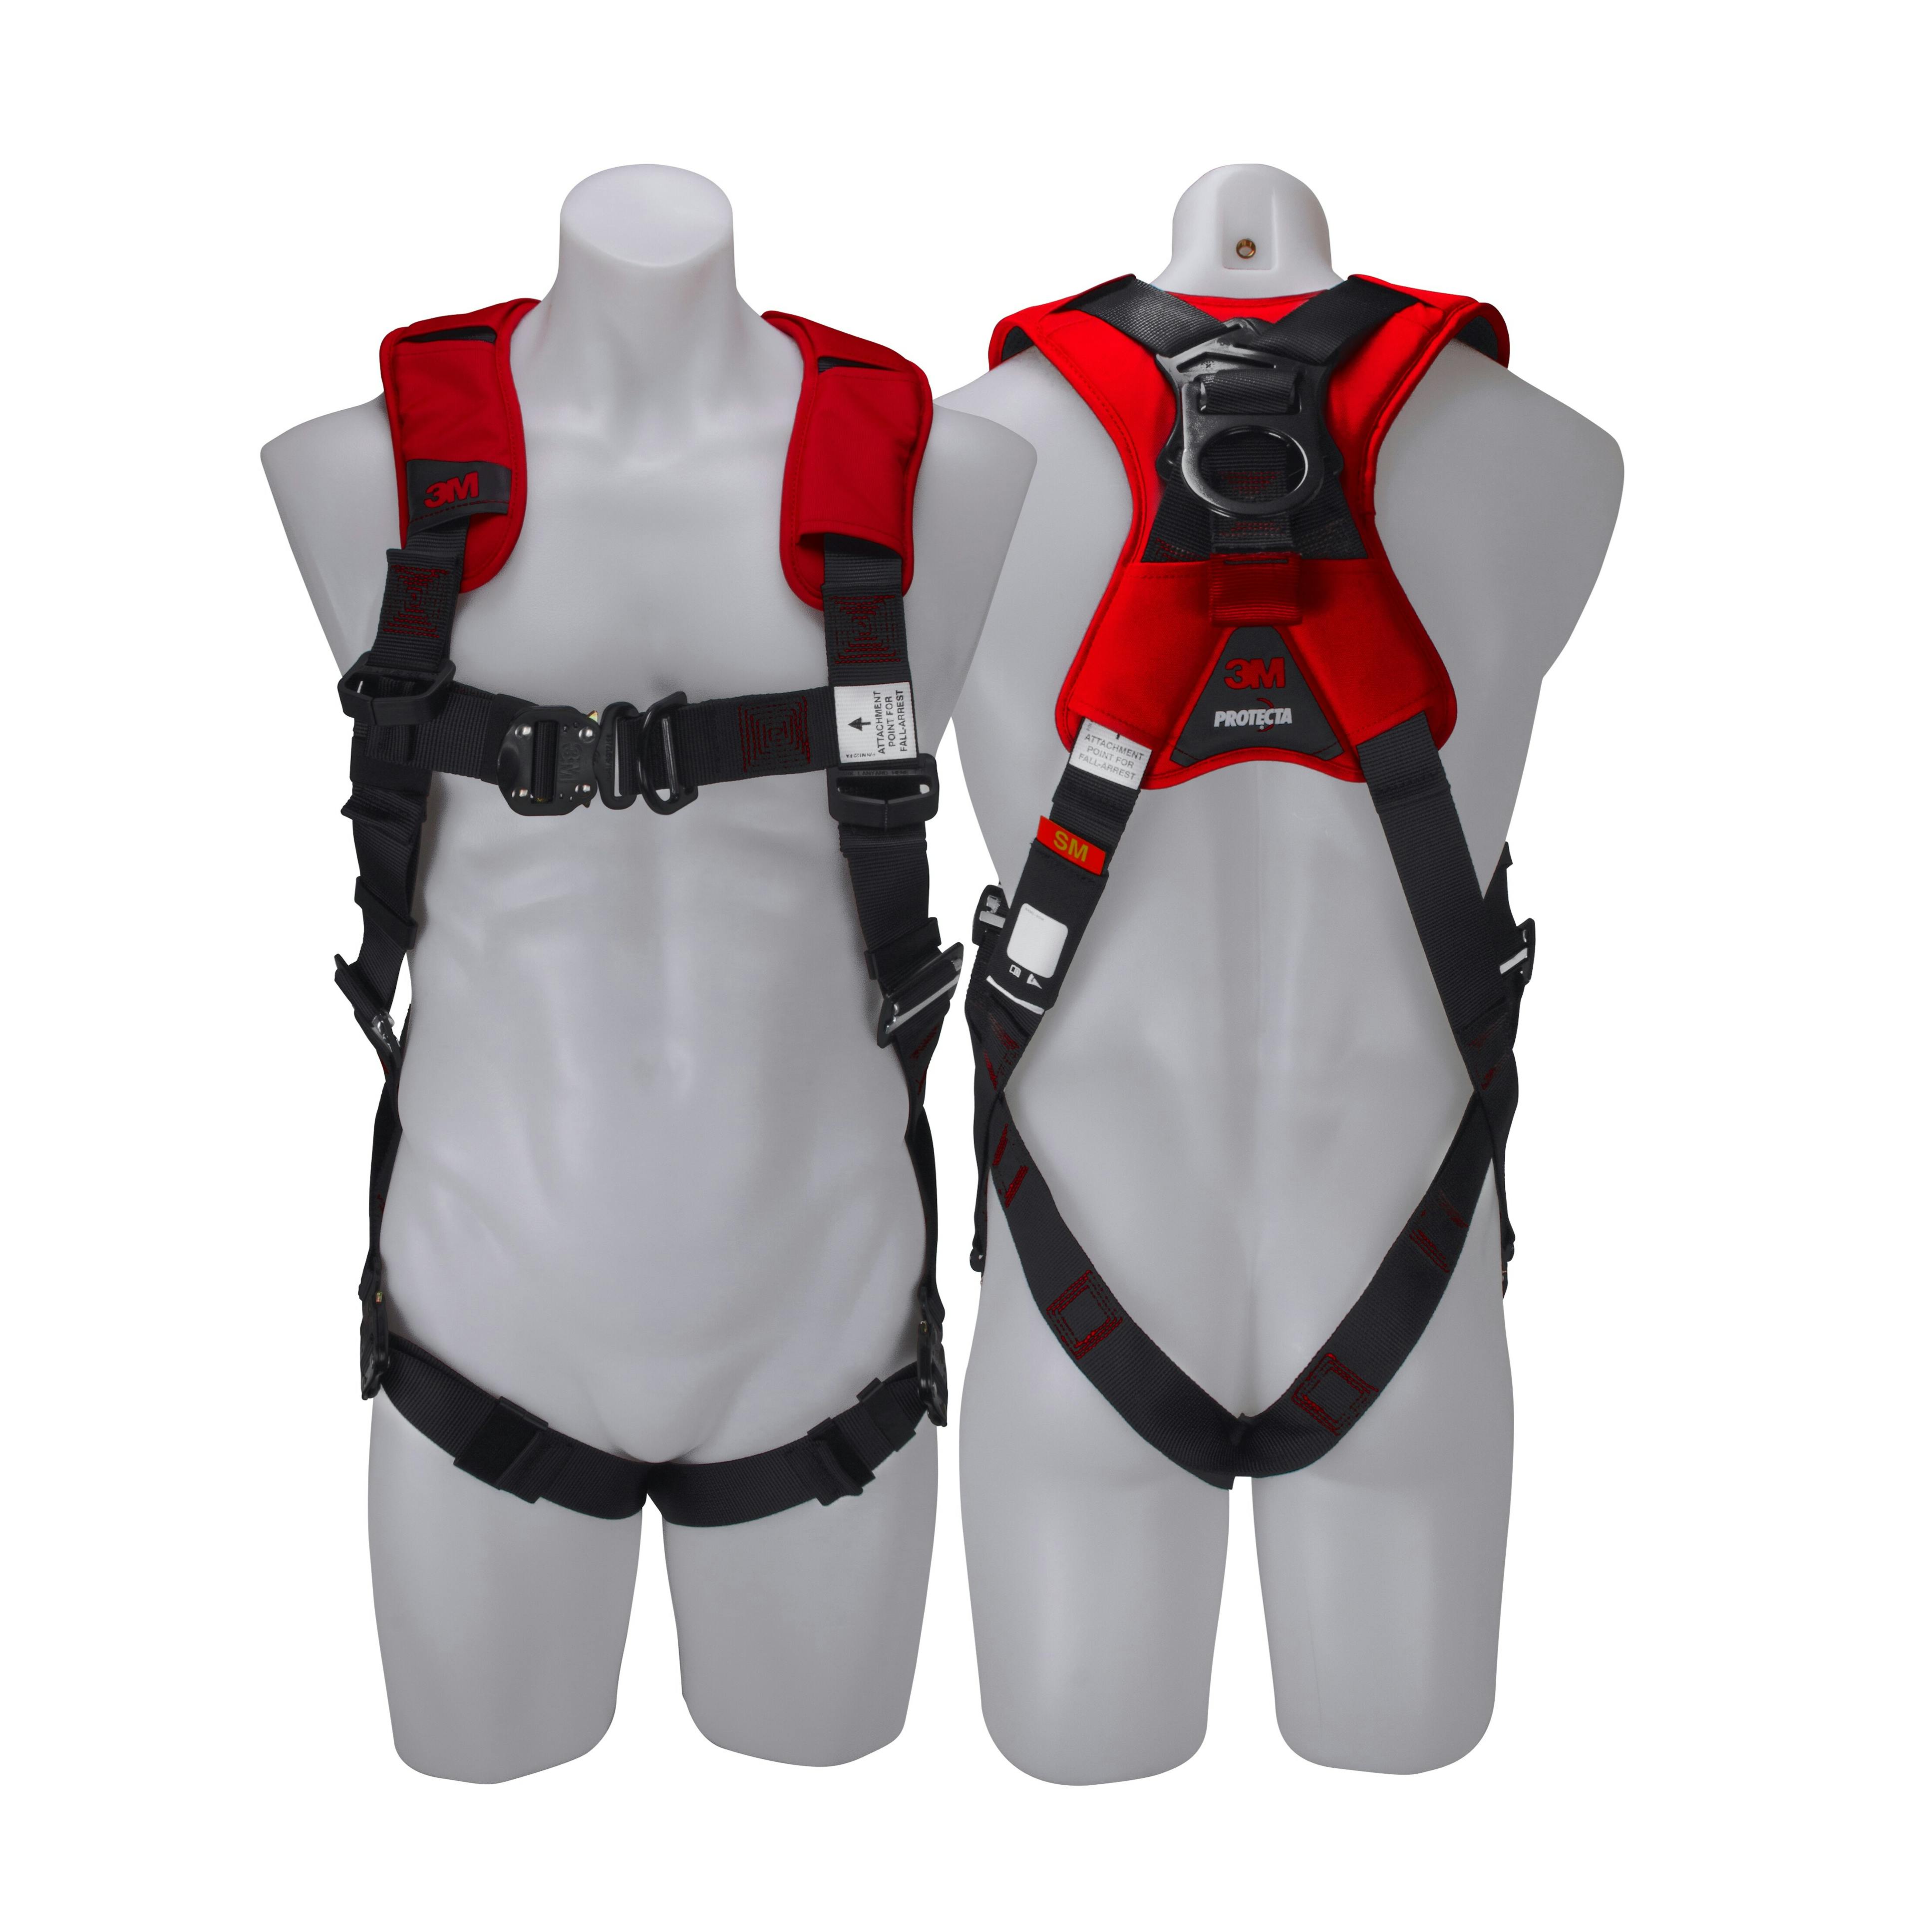 3M™ PROTECTA® X Riggers Harness with Padding 1161676, Red and Black, Small, 1 EA/Case